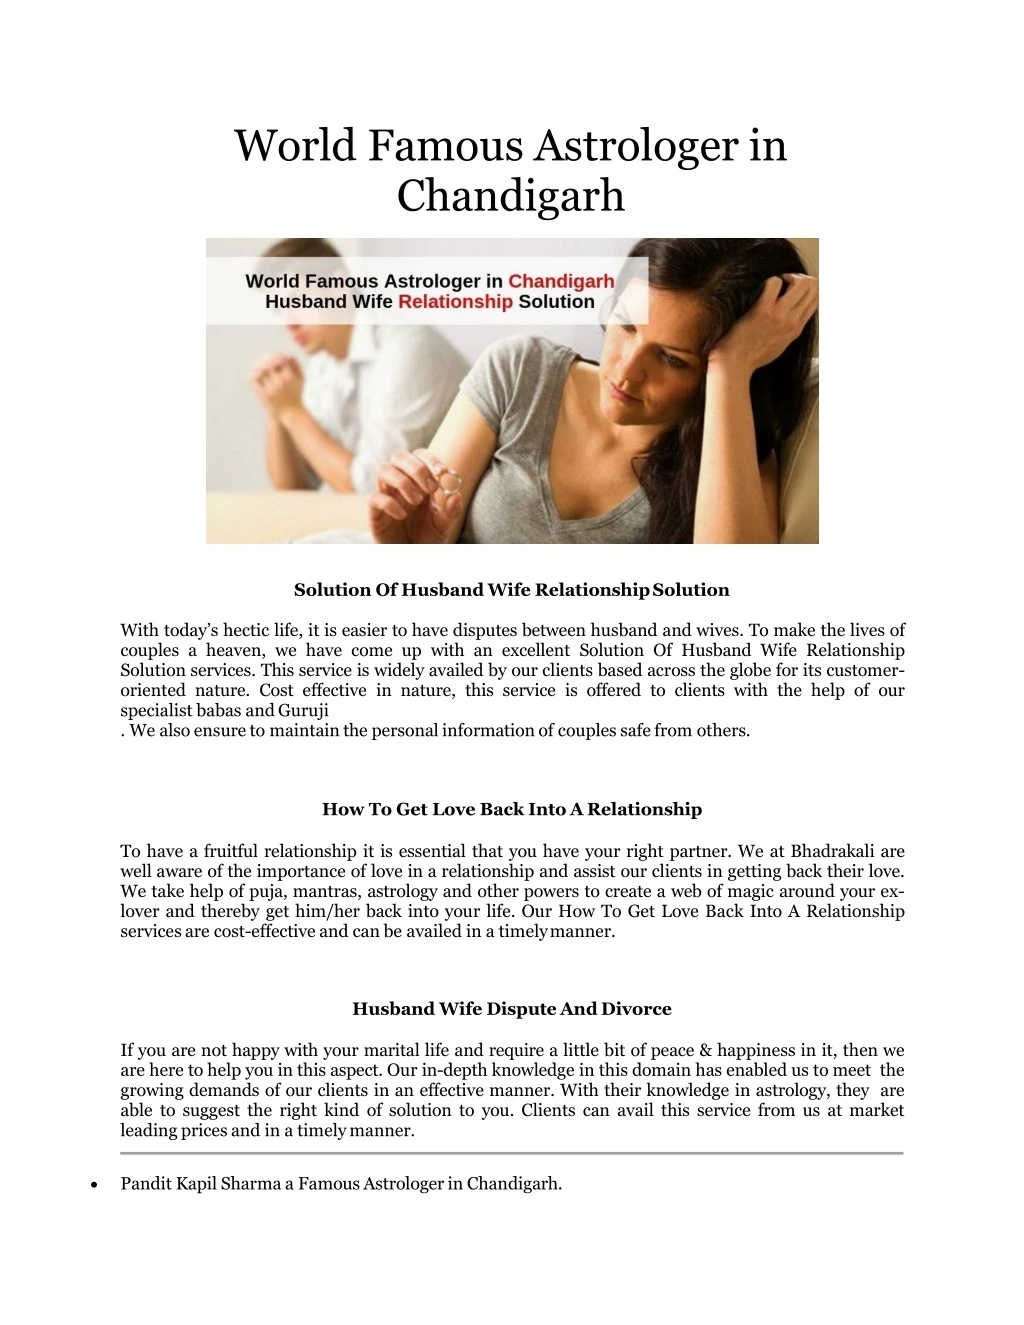 world famous astrologer in chandigarh